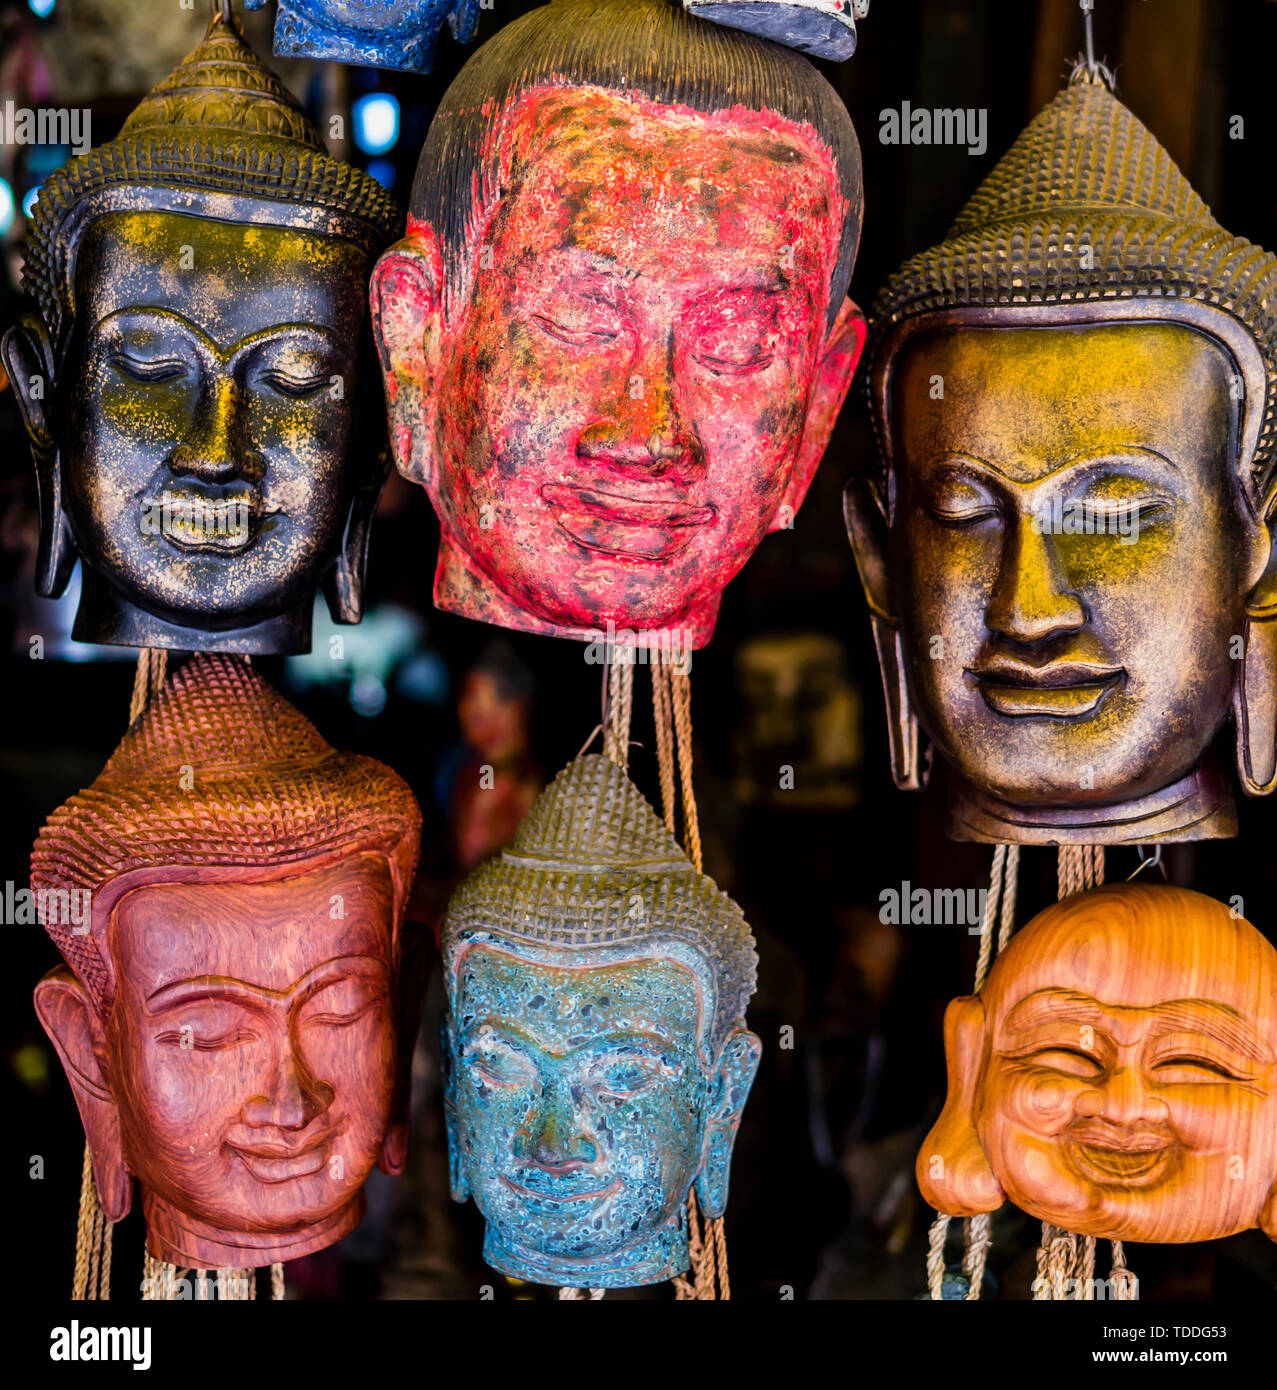 Old craft market showing carved buddha head masks, Siem Reap, Cambodia Stock Photo